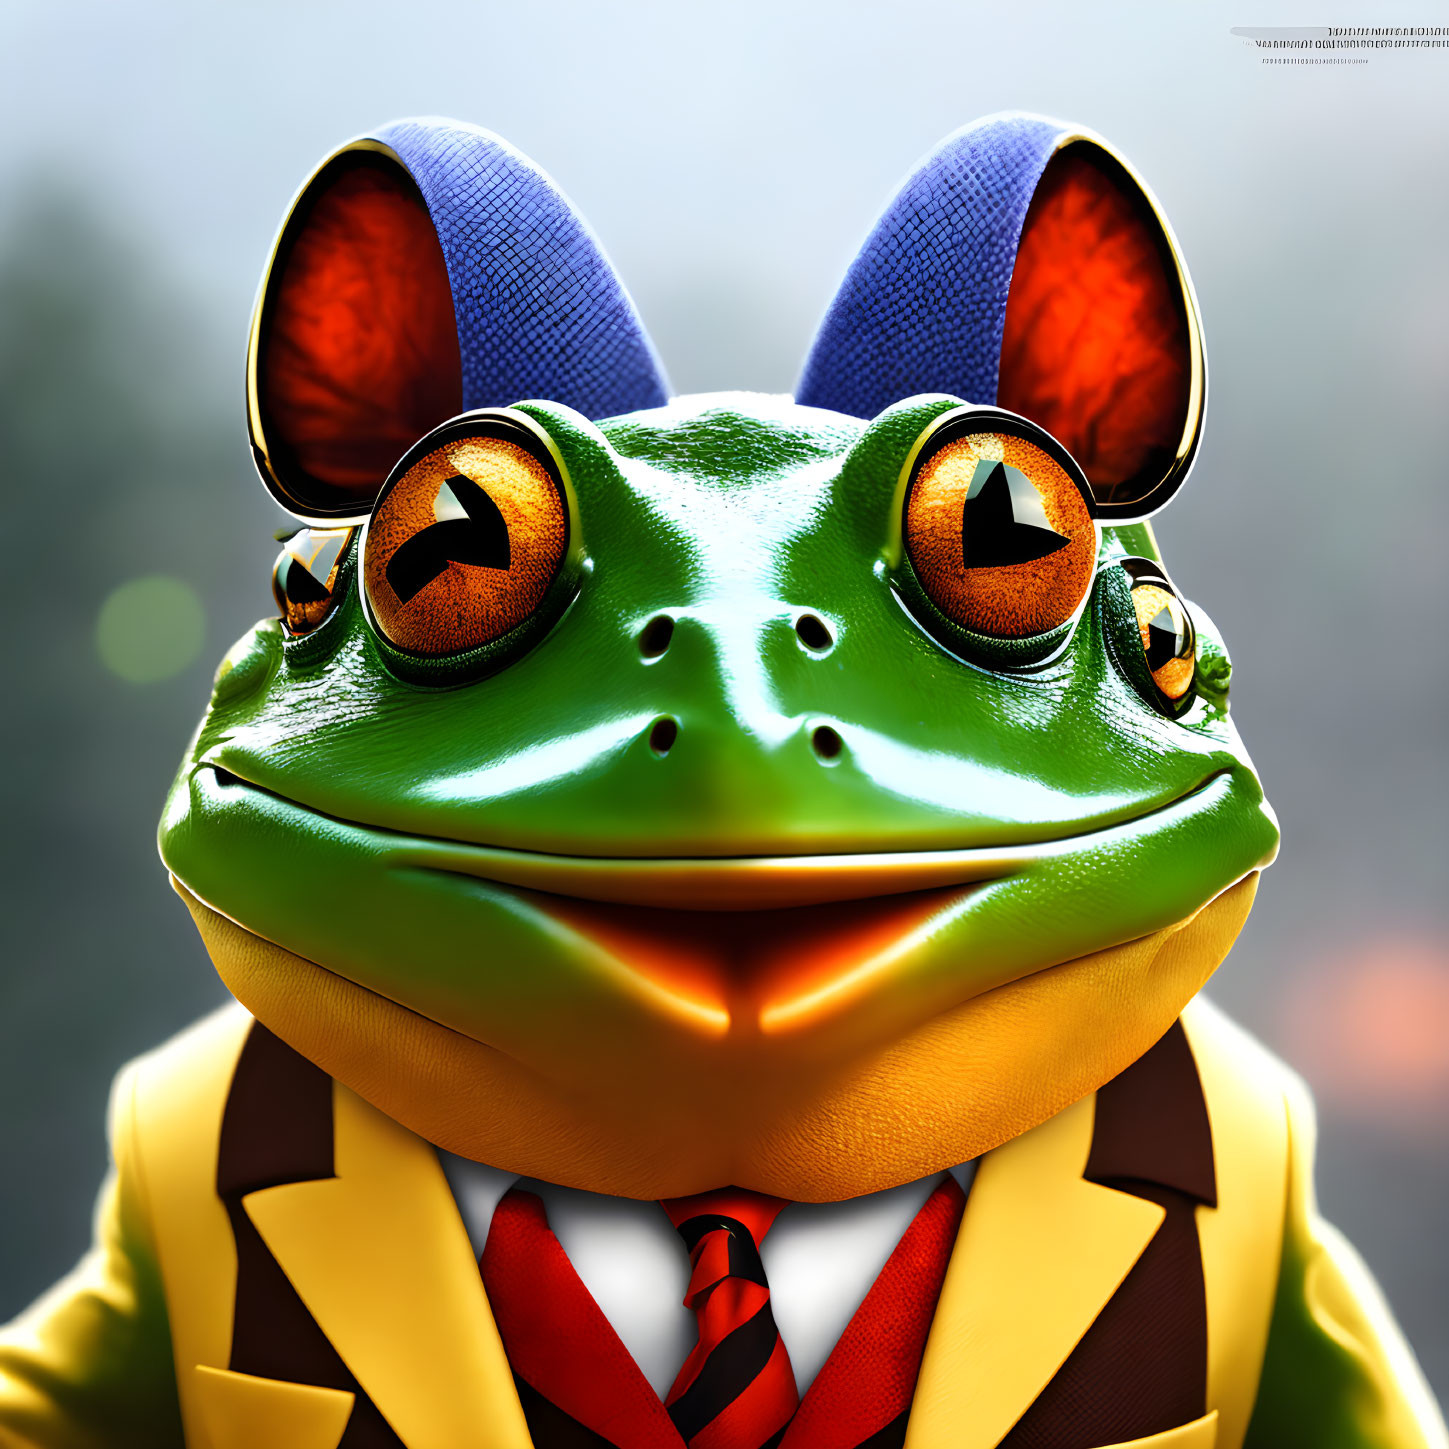 Anthropomorphic frog in yellow suit and headphones with red tie